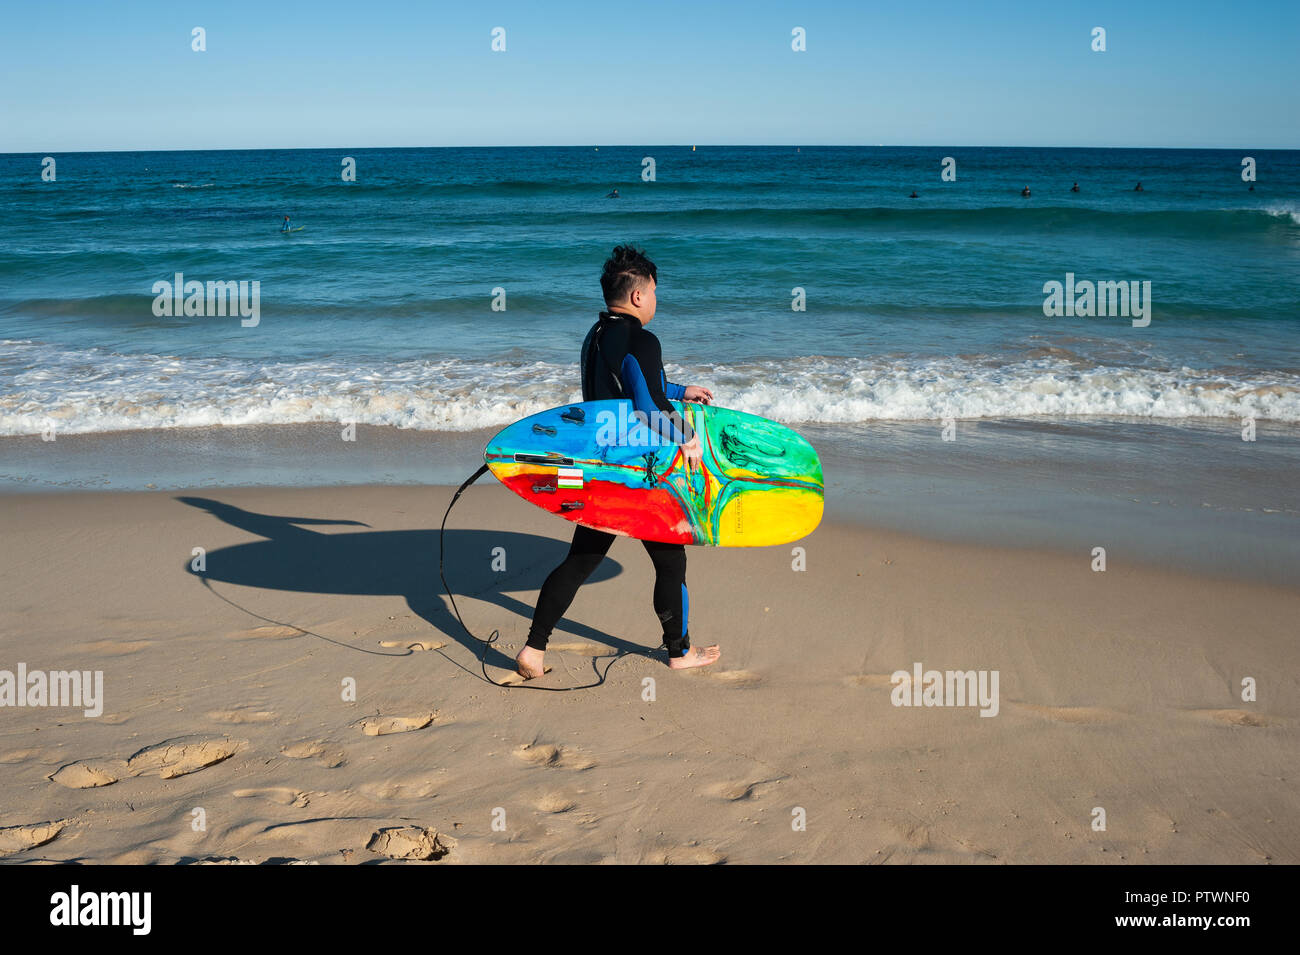 21.09.2018, Sydney, New South Wales, Australia - A surfer is seen holding his surfboard as he walks towards the sea at Bondi Beach. Stock Photo